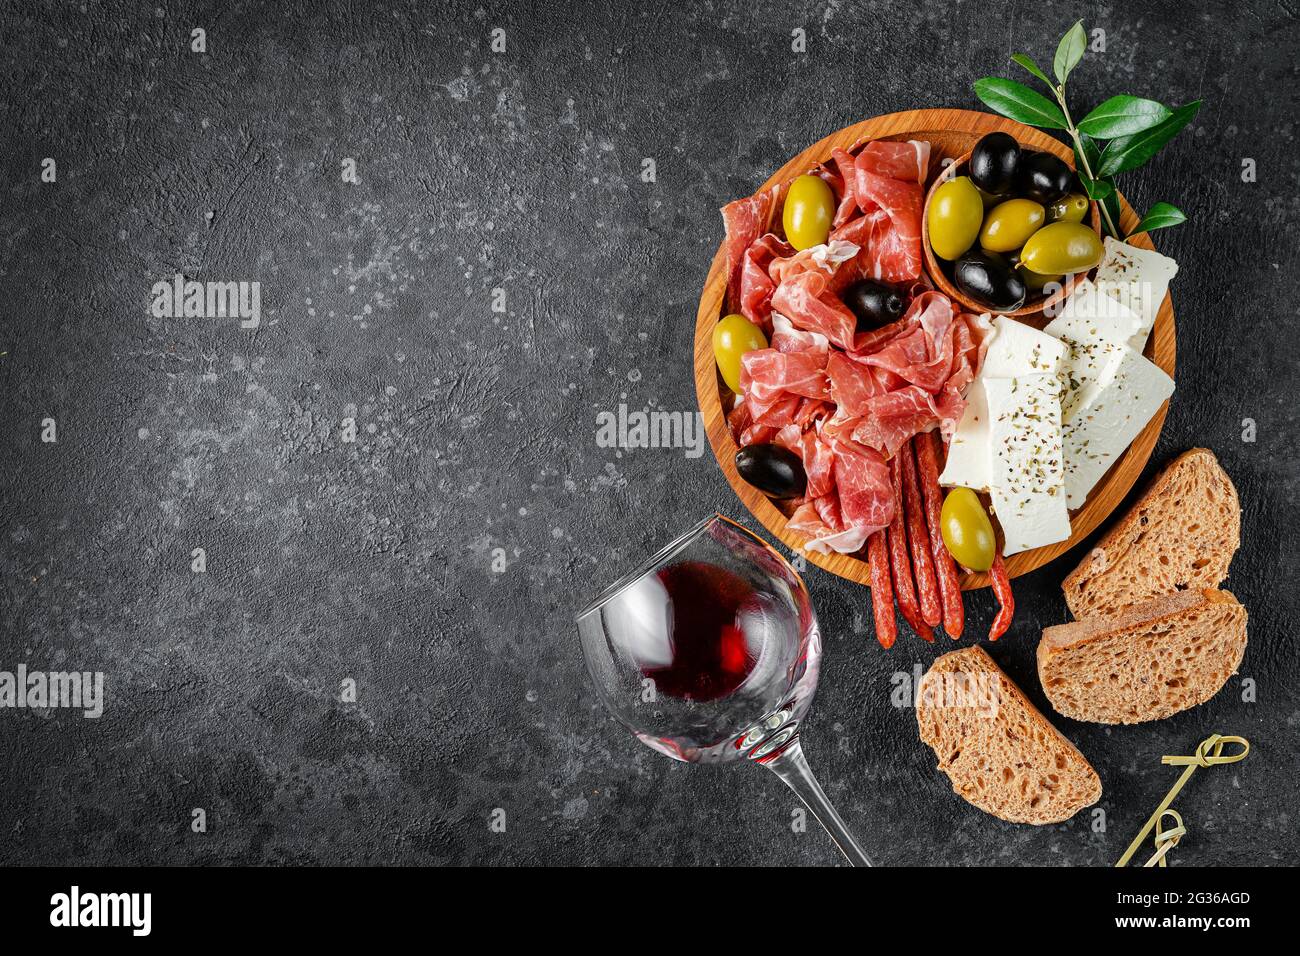 Appetizer wooden plate with meat, cheese and olives on dark concrete background. Copy space, flat lay. Stock Photo